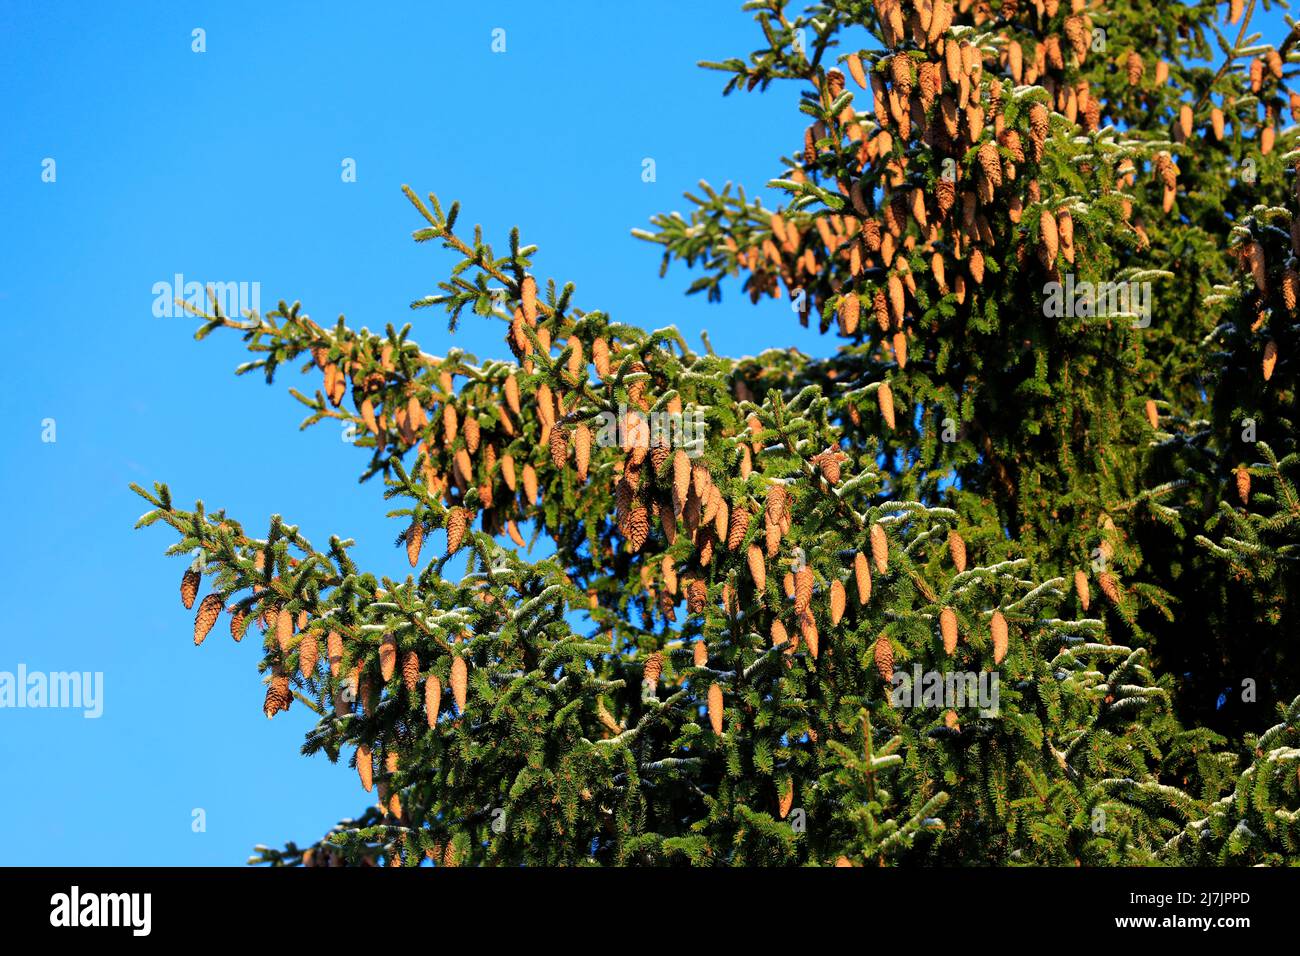 Norway spruce tree, Picea abies, growing in forest in Finland, branches carrying lots of cones. Blue sky background. January 2022. Stock Photo